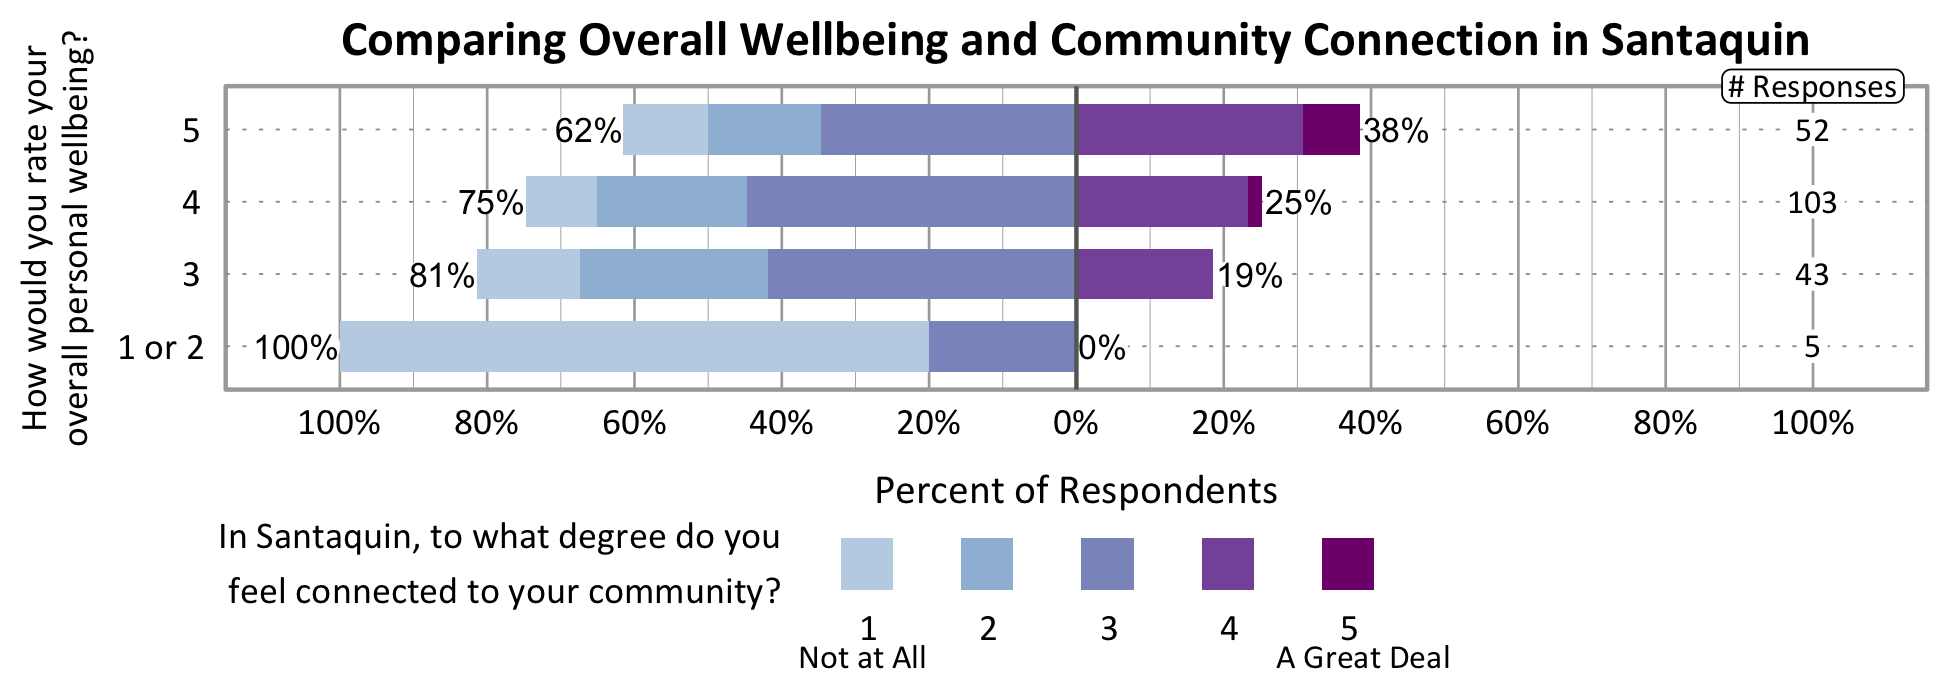 Likert Graph. Title: Comparing Overall Wellbeing and Community Connection in Santaquin. Of the 5 respondents that rate their overall personal wellbeing as a 1 or 2, 100% indicate a community connection score of 1, 2, or 3 while 0% indicate a community connection score of 4 or 5. Of the 43 respondents that rate their overall personal wellbeing as a 3, 81% indicate a community connection score of 1, 2, or 3 while 19% indicate a community connection score of 4 or 5. Of the 103 respondents that rate their overall personal wellbeing as a 4, 75% indicate a community connection score of 1, 2, or 3 while 25% indicate a community connection score of 4 or 5. Of the 52 participants that rate their overall wellbeing as a 5, 62% indicate a community connection score of 1, 2, or 3 while 38% indicate a community connection score of 4 or 5.